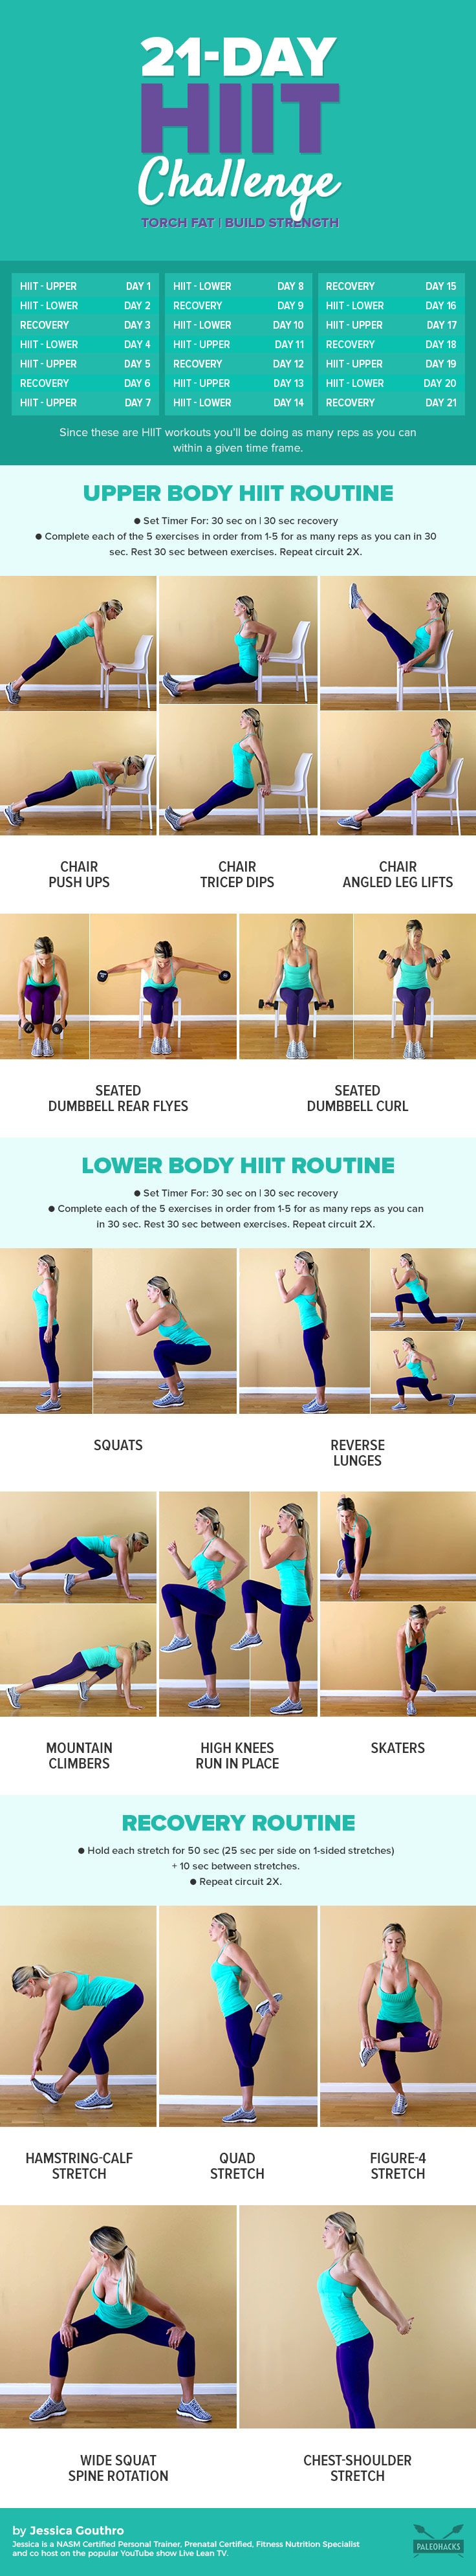 high intensity interval training workout